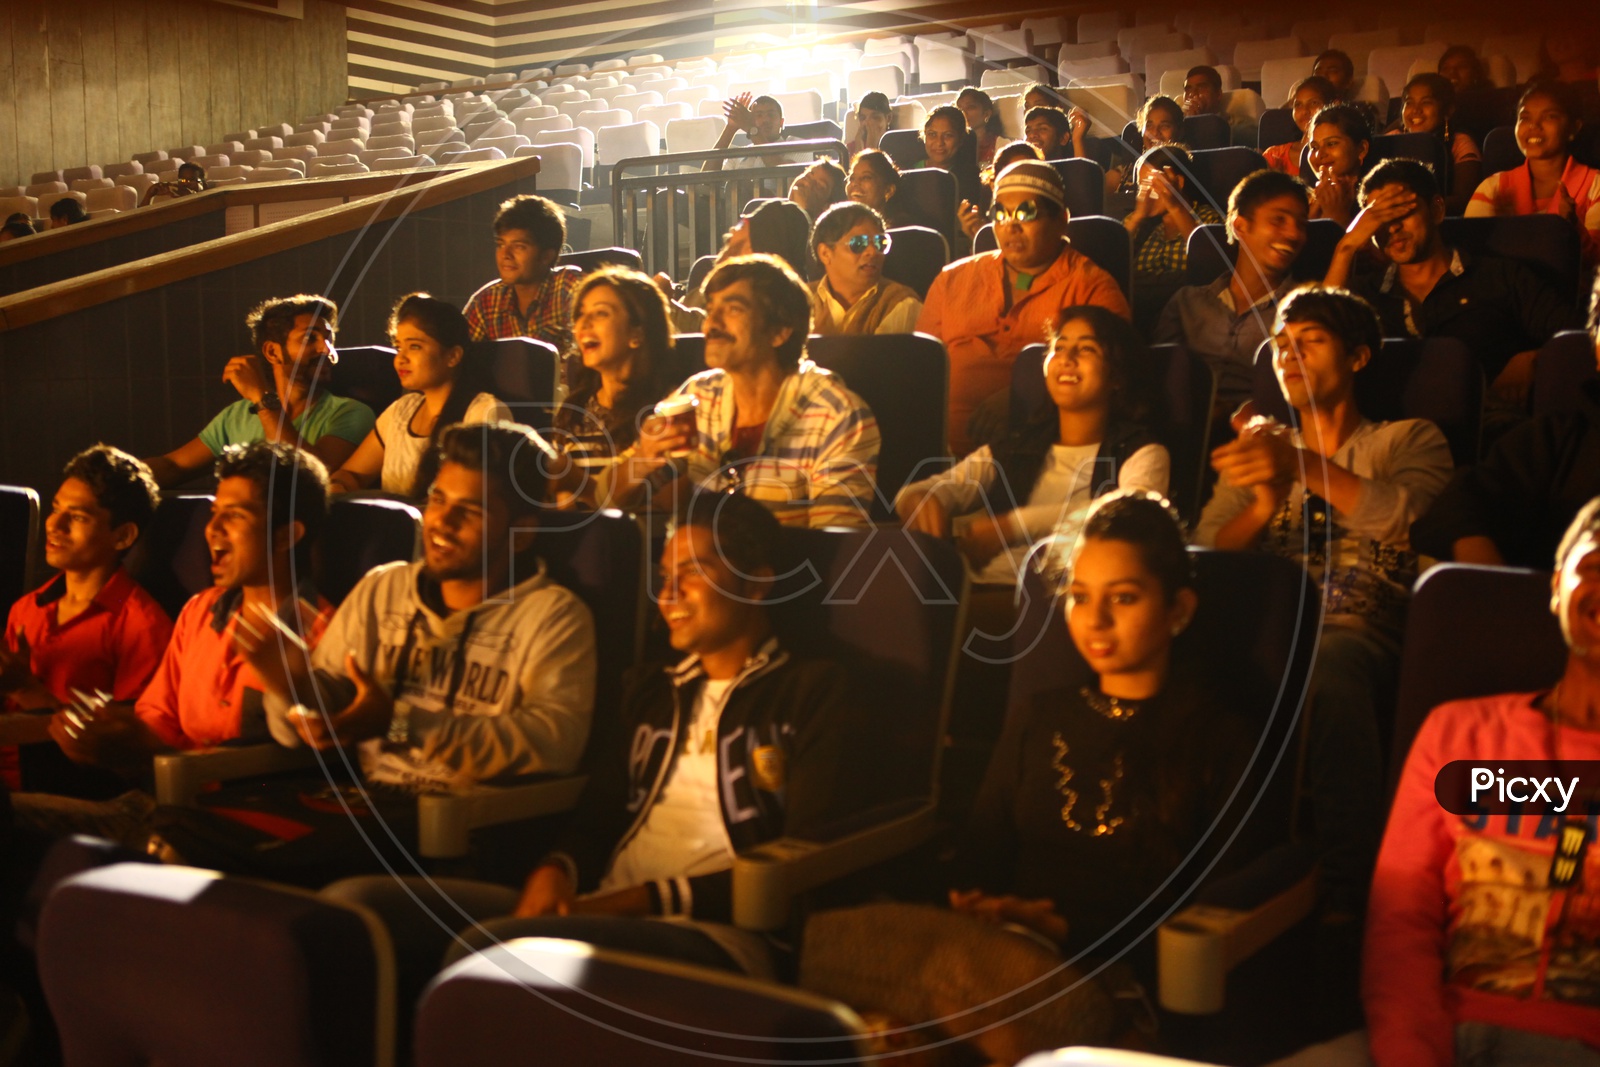 Friends In Cinema Watching a Movie, People Stock Footage ft. audience &  couple - Envato Elements